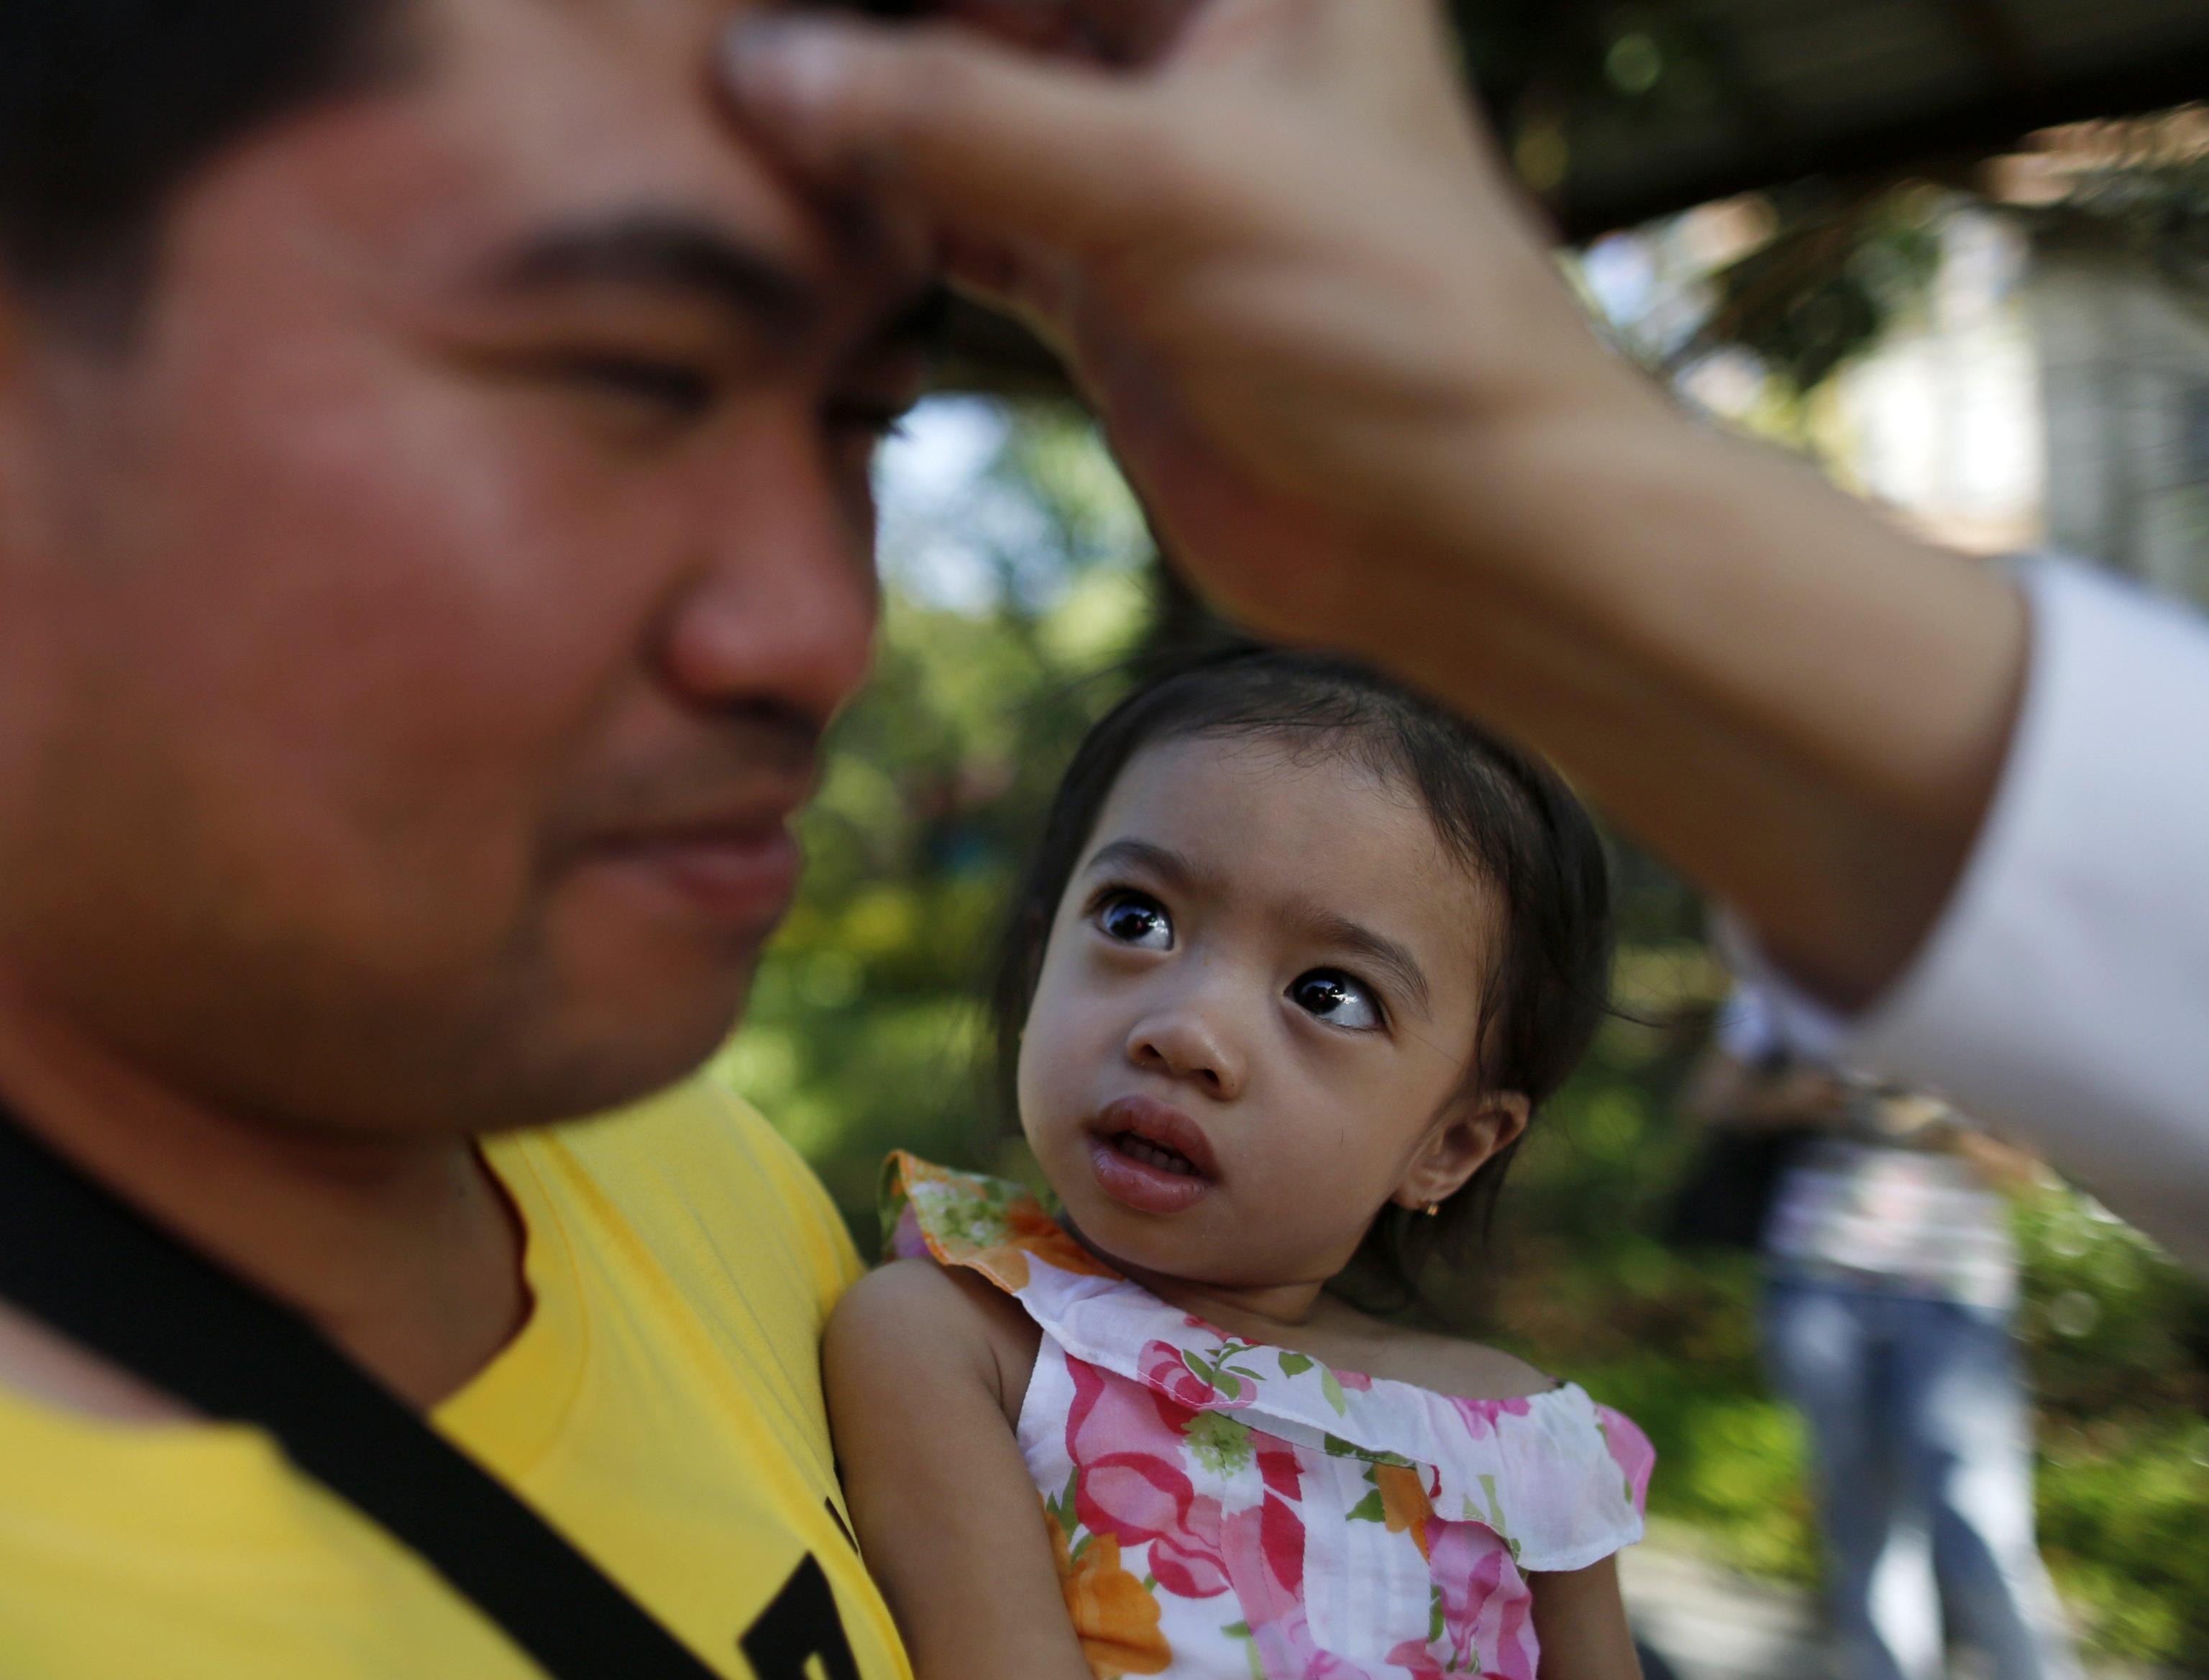 epa05822048 A Filipino child looks on as her father receives a cross marking on the forehead during Ash Wednesday in Pasay city, south of Manila, Philippines, 01 March 2017. Filipino Catholic started the 40-day Lenten Season on Ash Wednesday by going to church to have their forehead marked with an ash cross sign. The rite is part of the culture of many Filipino Catholics, symbolizing their acceptance for the start of Lent and to show their sincere efforts and discipline to cleanse their lives of sin through prayers.  EPA/FRANCIS R. MALASIG